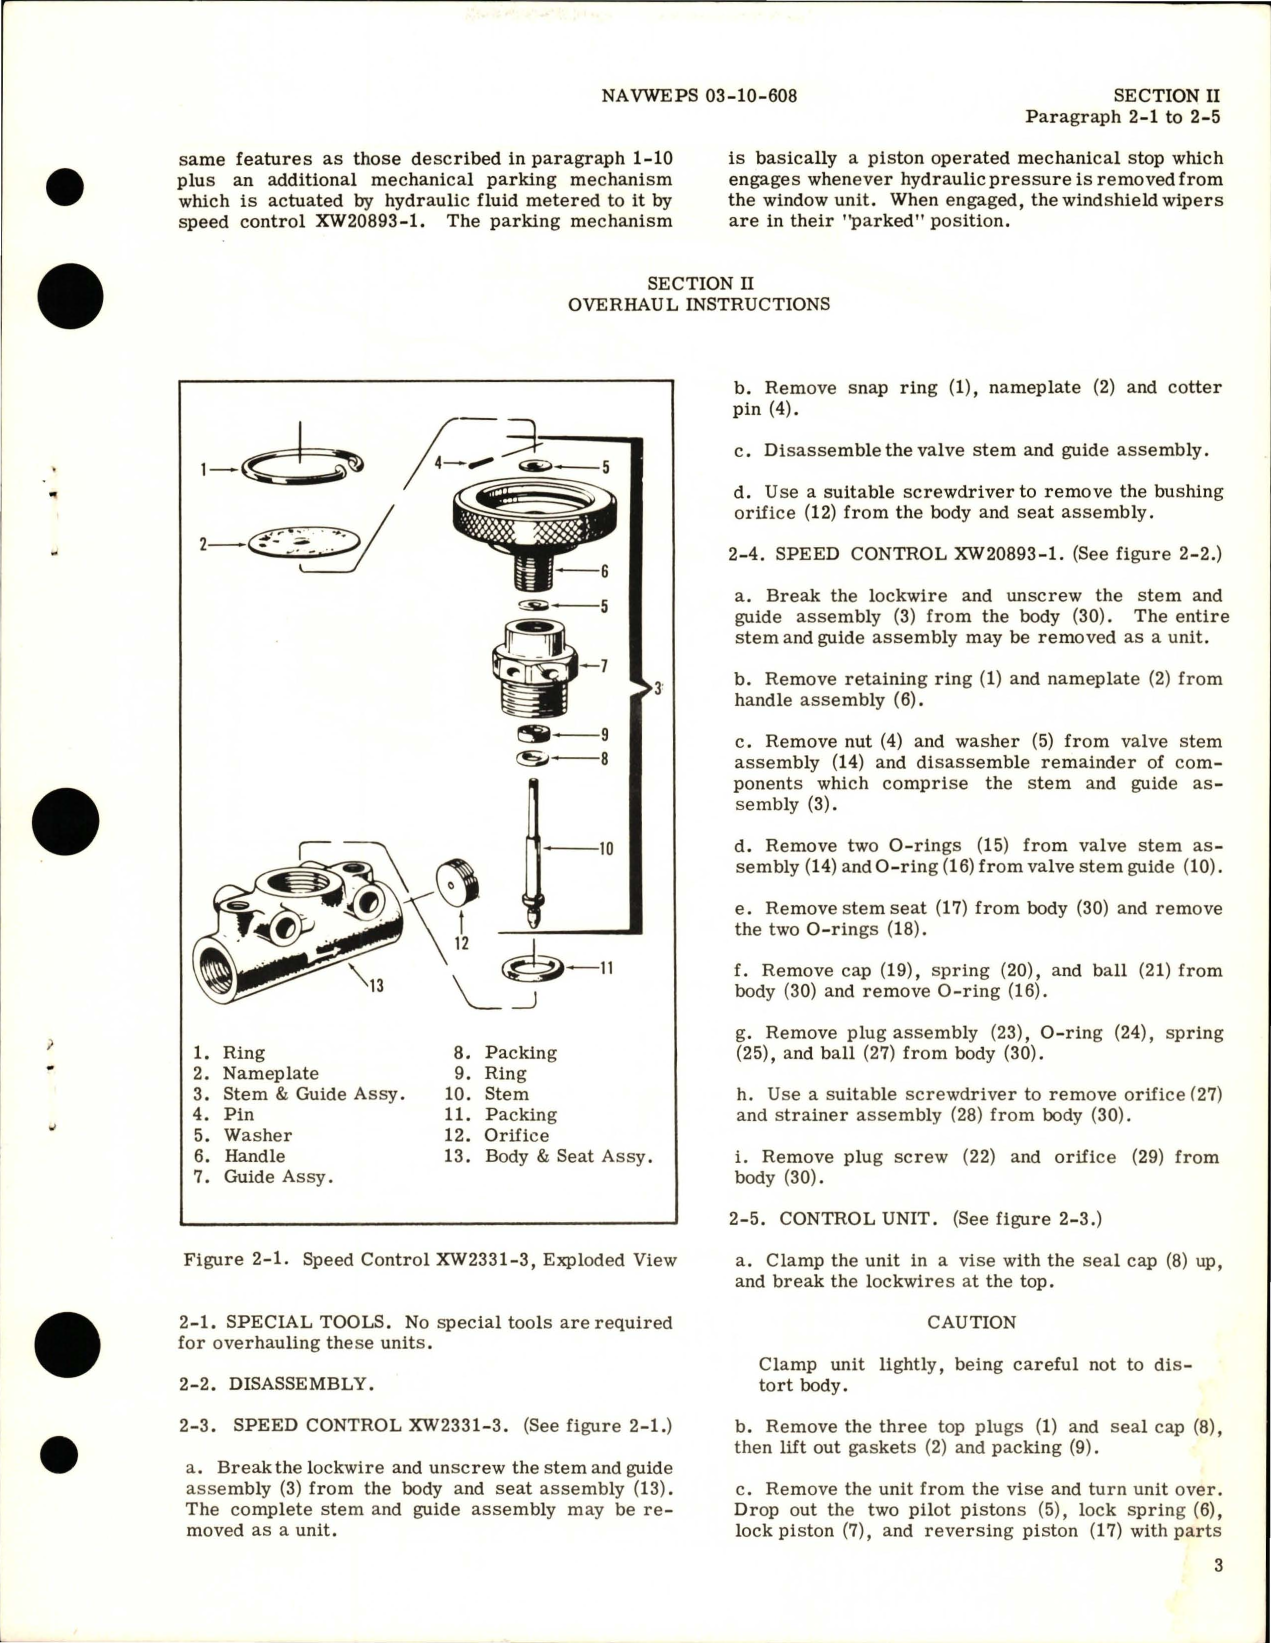 Sample page 7 from AirCorps Library document: Overhaul Instructions for Hydraulic Windshield Wiper System Components - Control Unit XW2069-3, Speed Control XW2331-3, and 20893-1